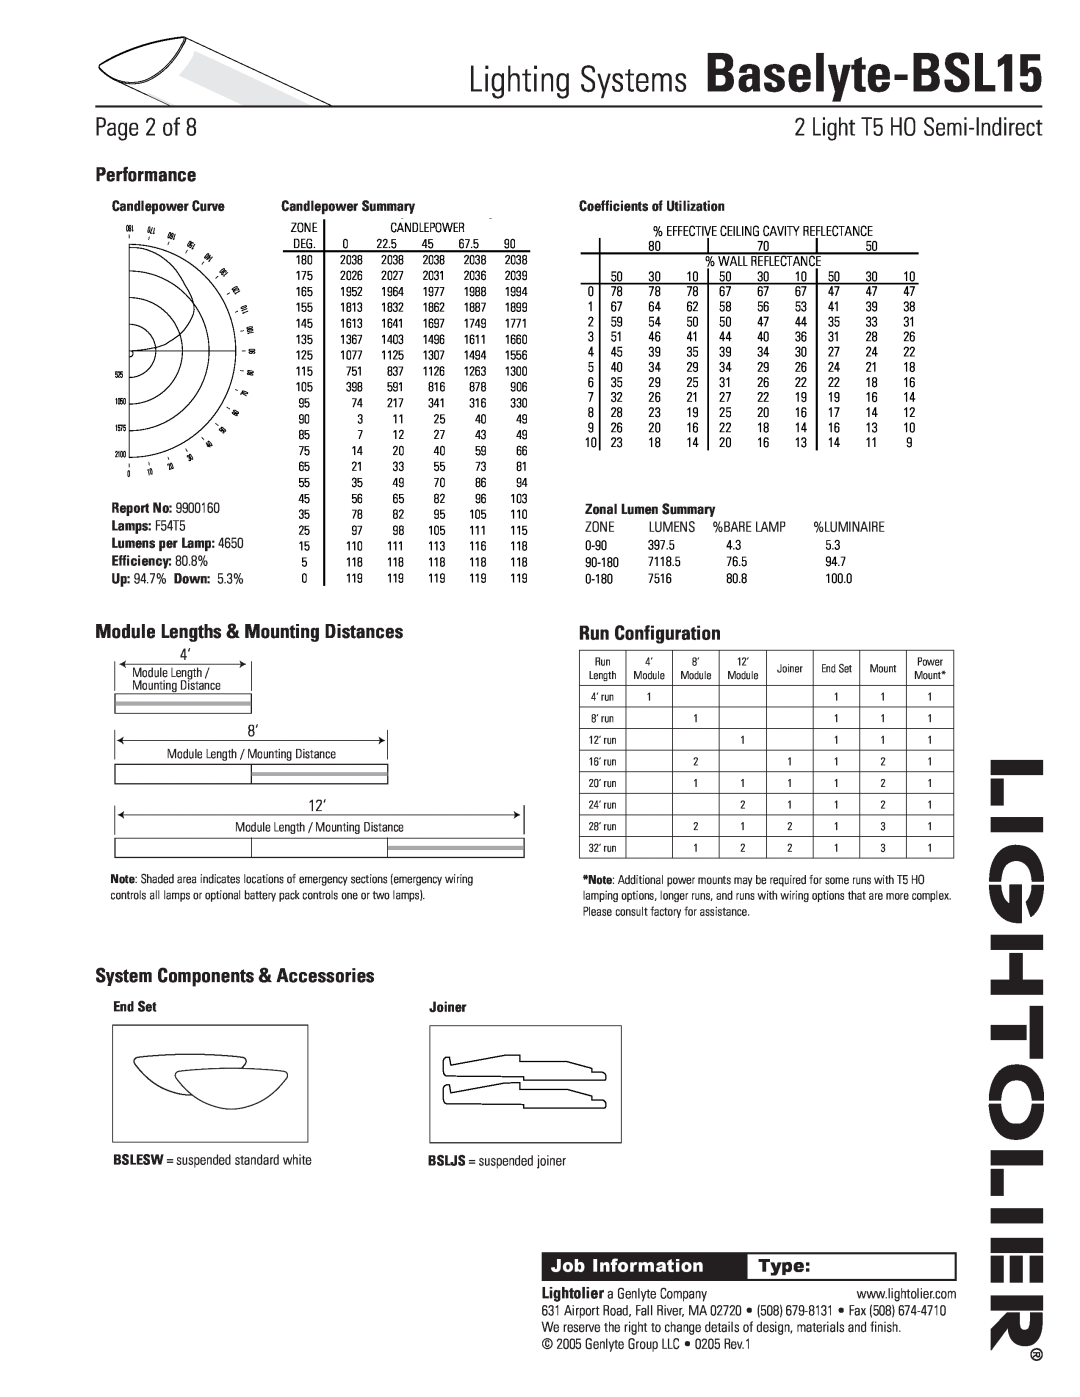 Lightolier Lighting Systems Baselyte-BSL15, Module Lengths & Mounting Distances, Run Configuration, Type, Performance 